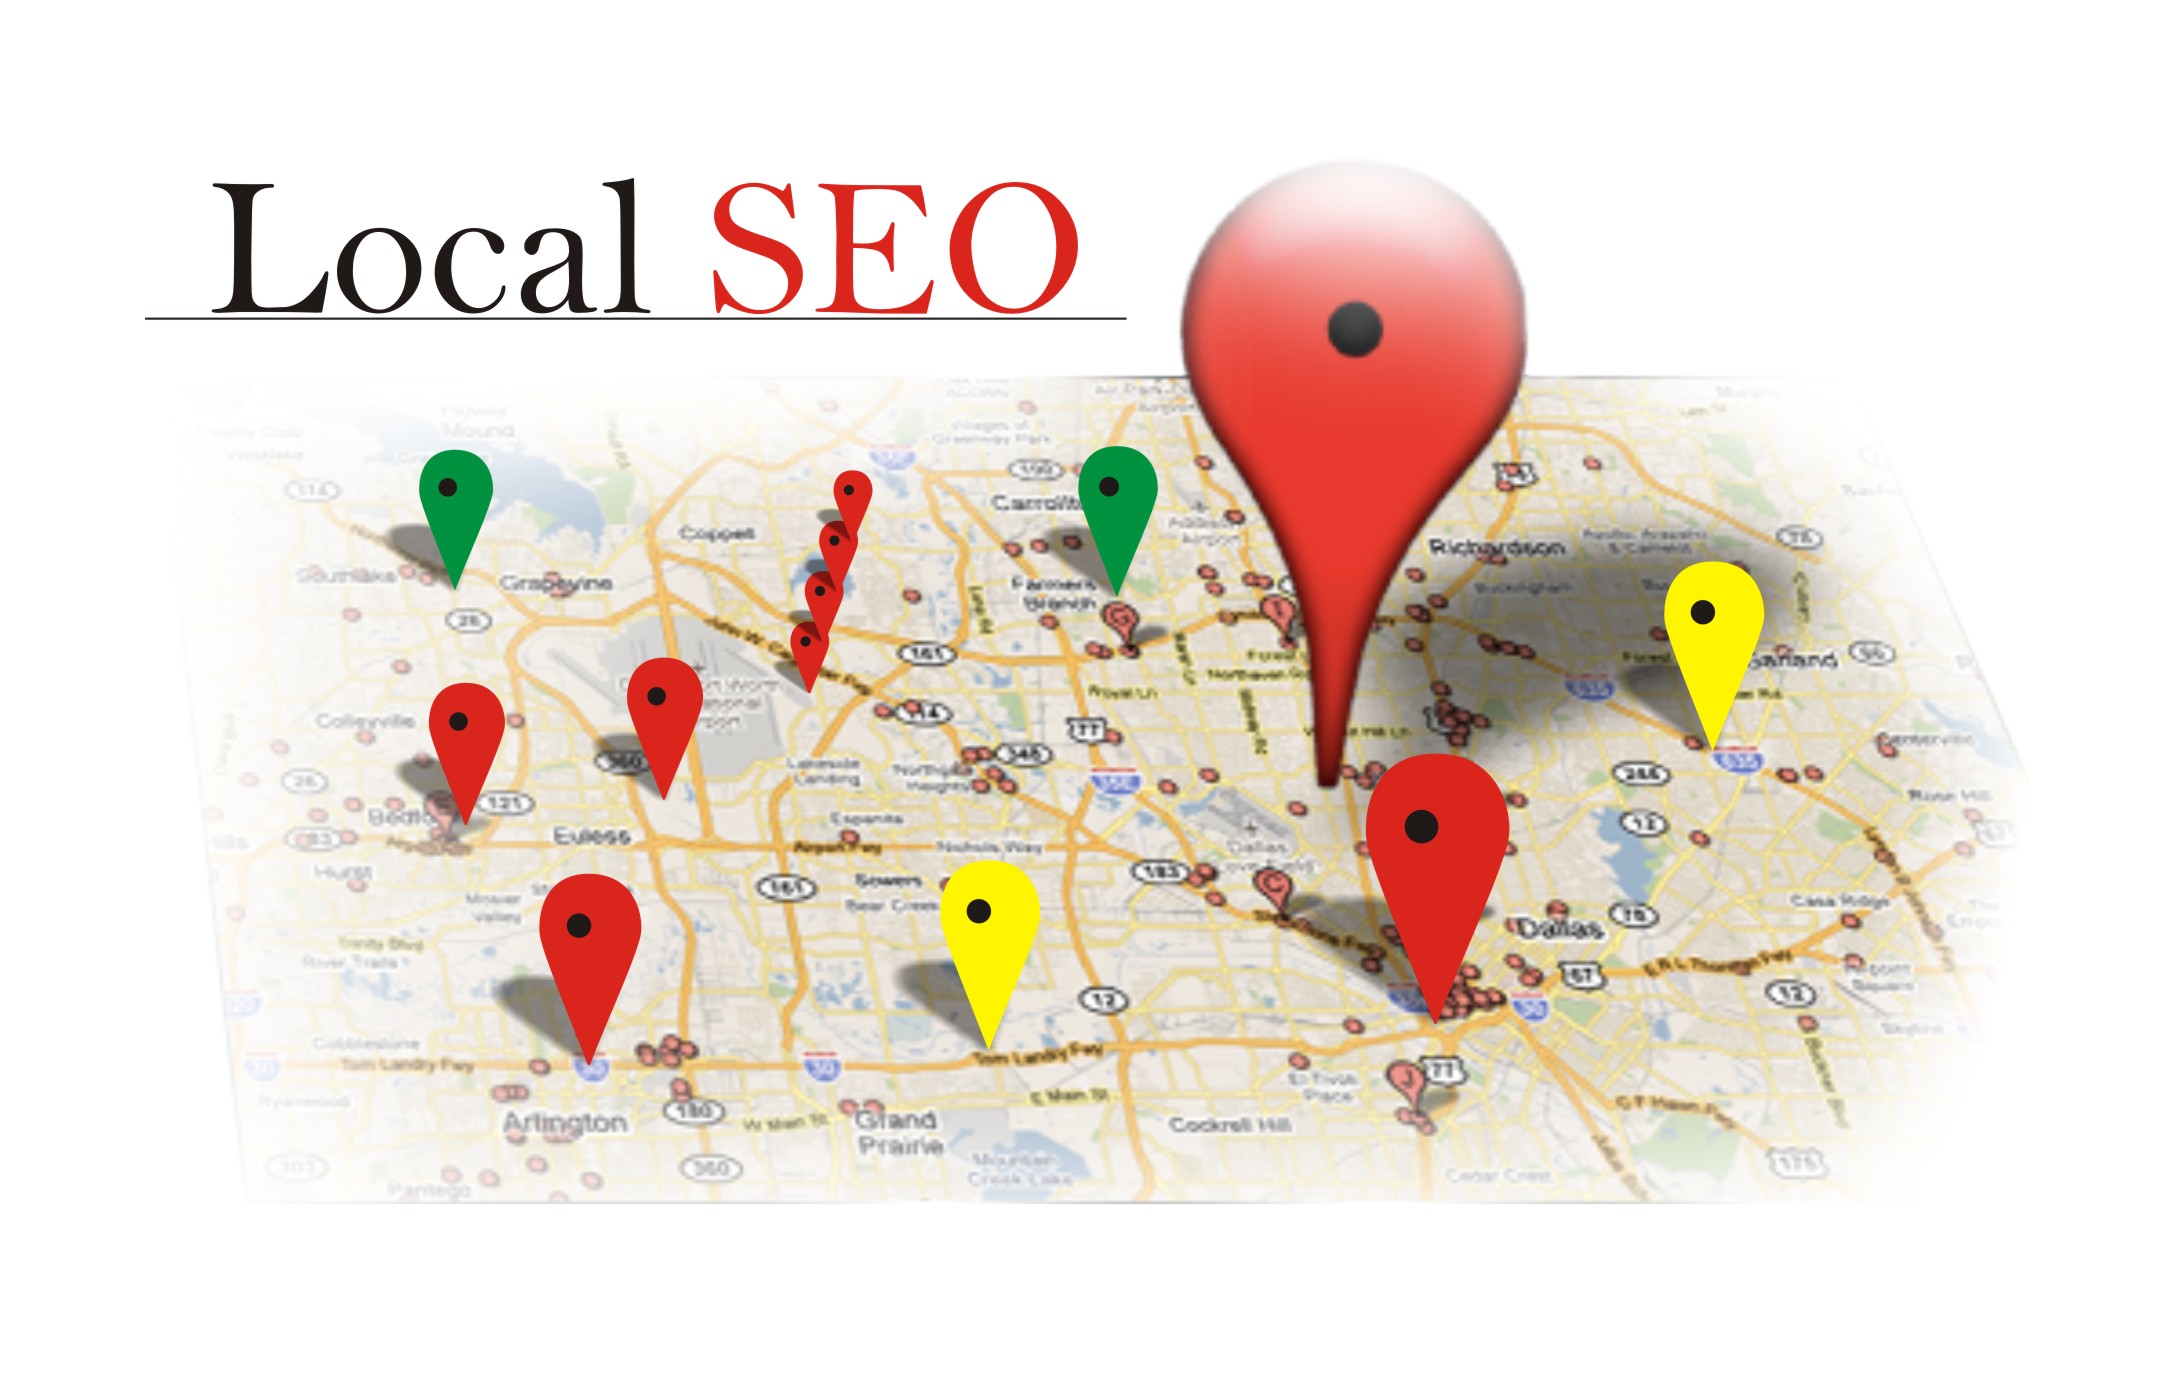 Local SEO for small businesses: What to do and what not to do